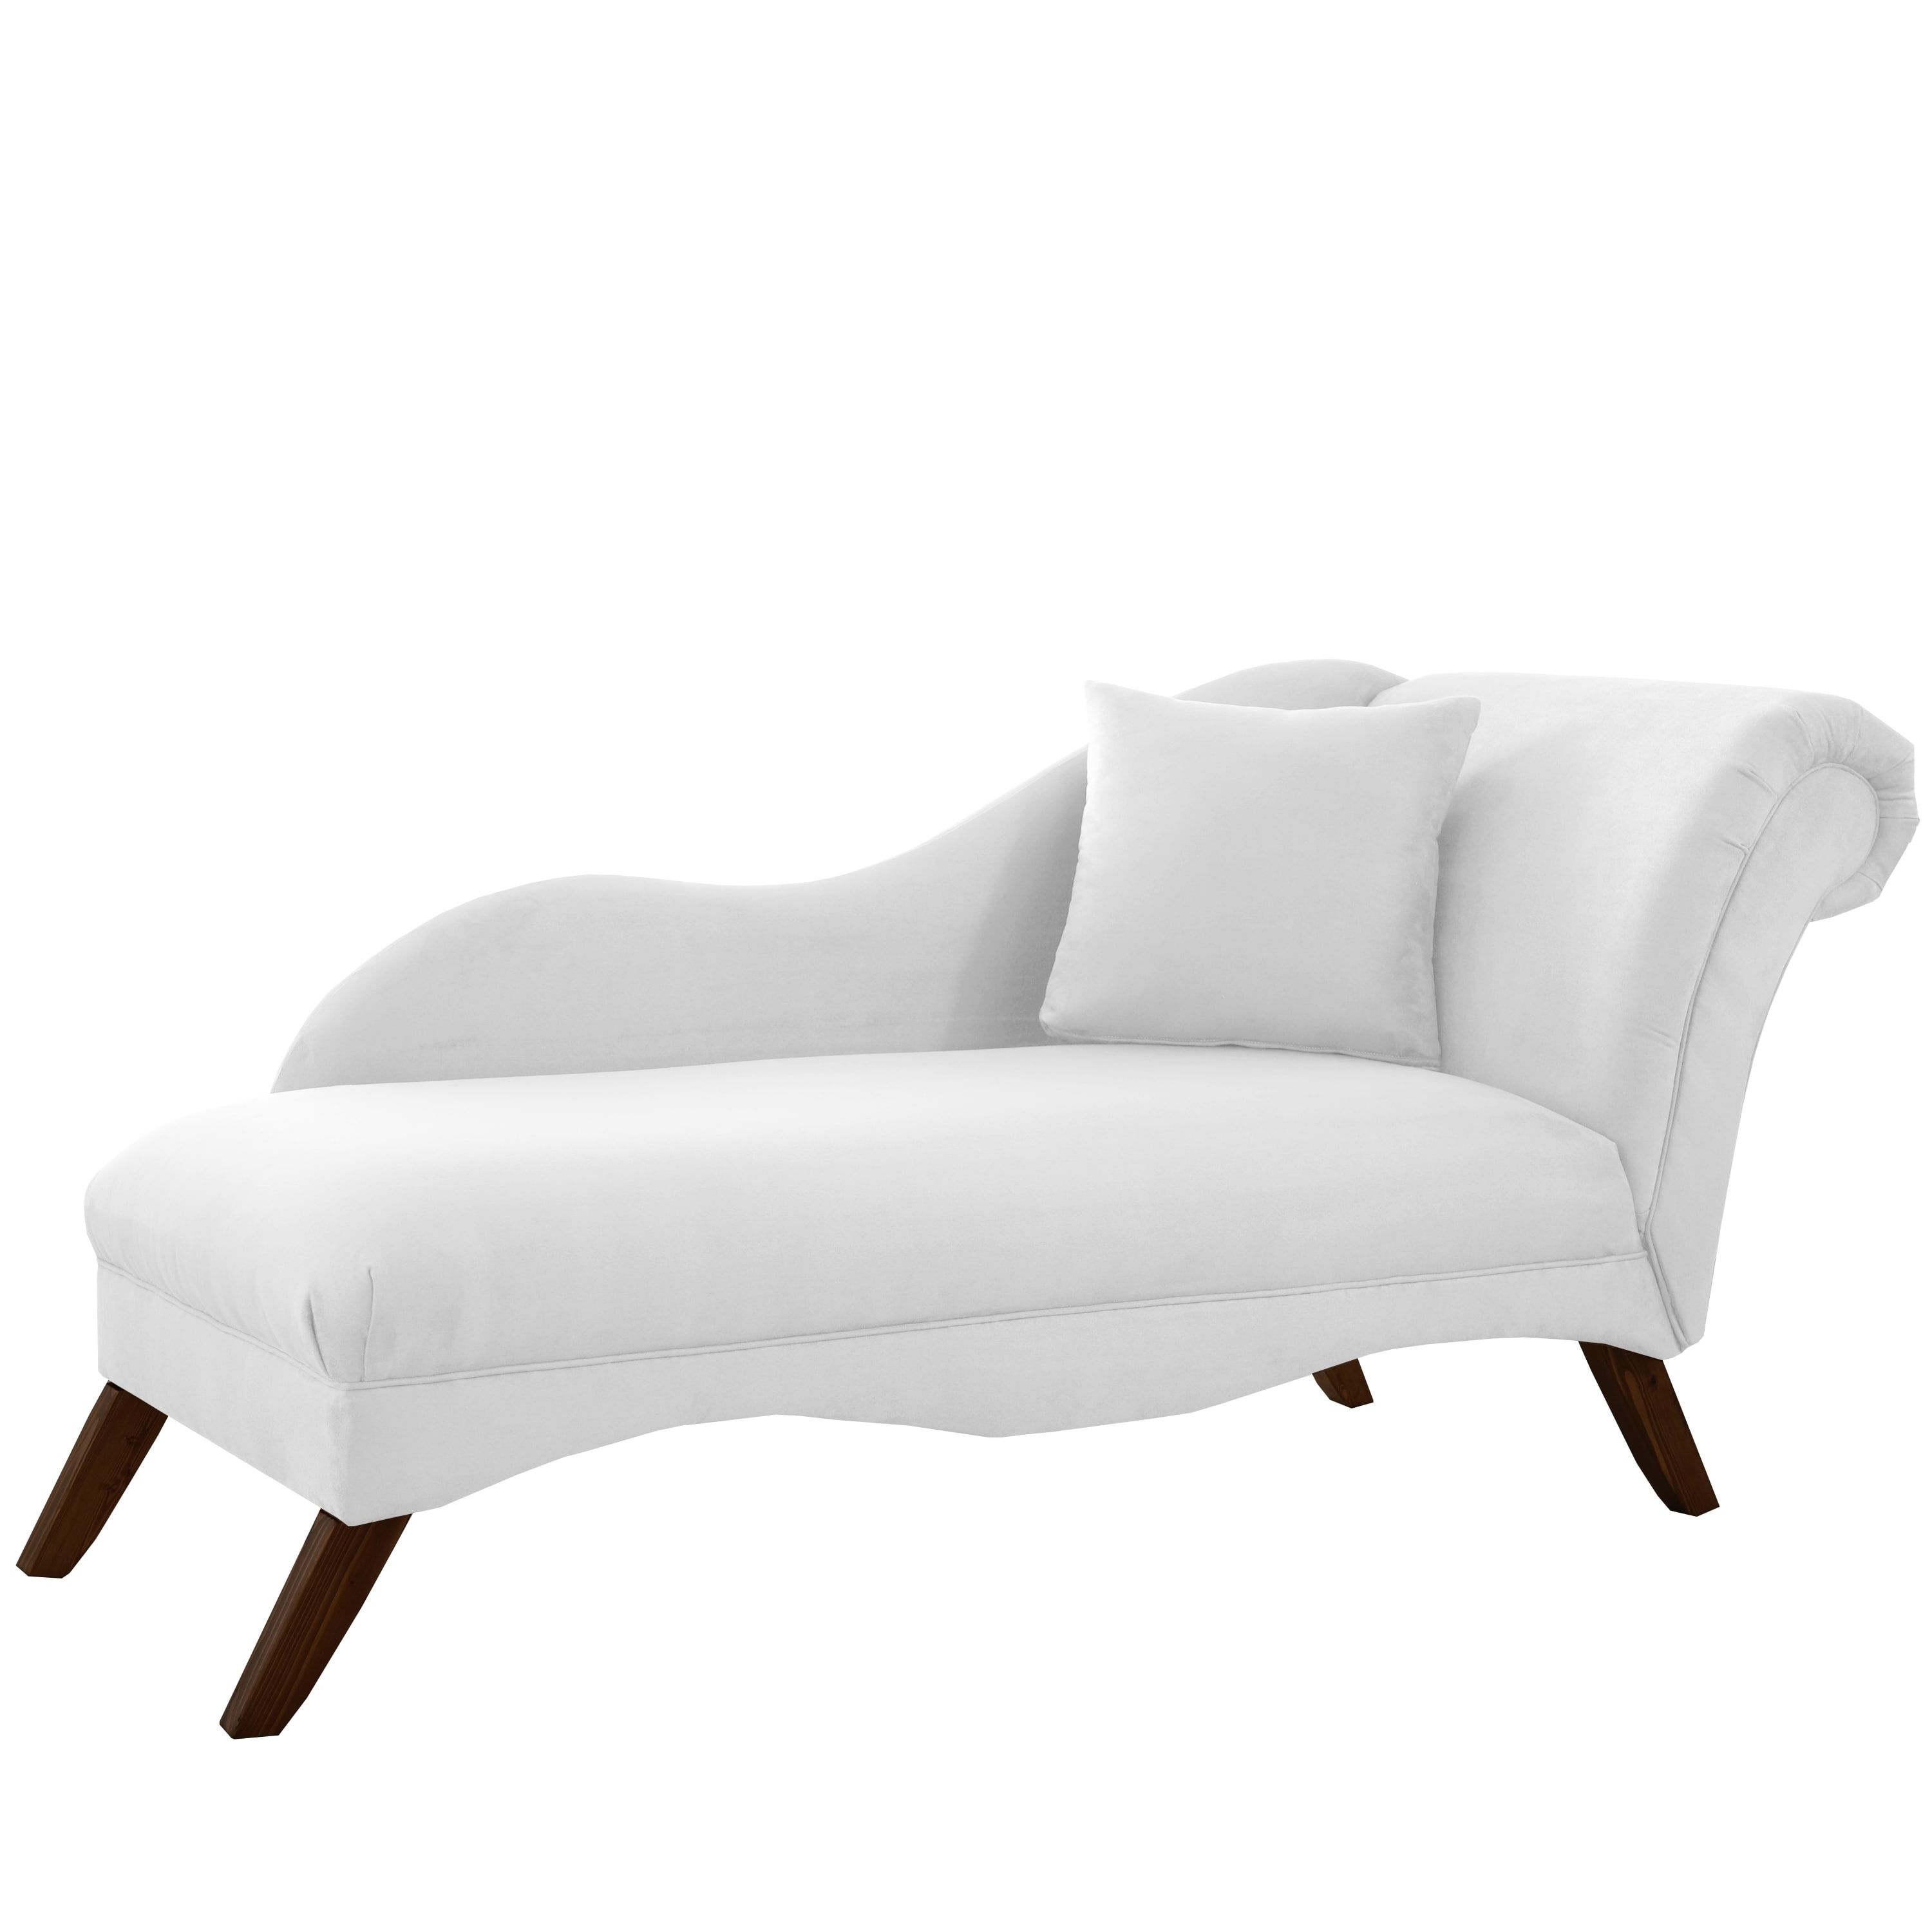 Best And Newest Skyline Furniture Chaise Lounge In Velvet White – Free Shipping Within Overstock Chaise Lounges (View 8 of 15)